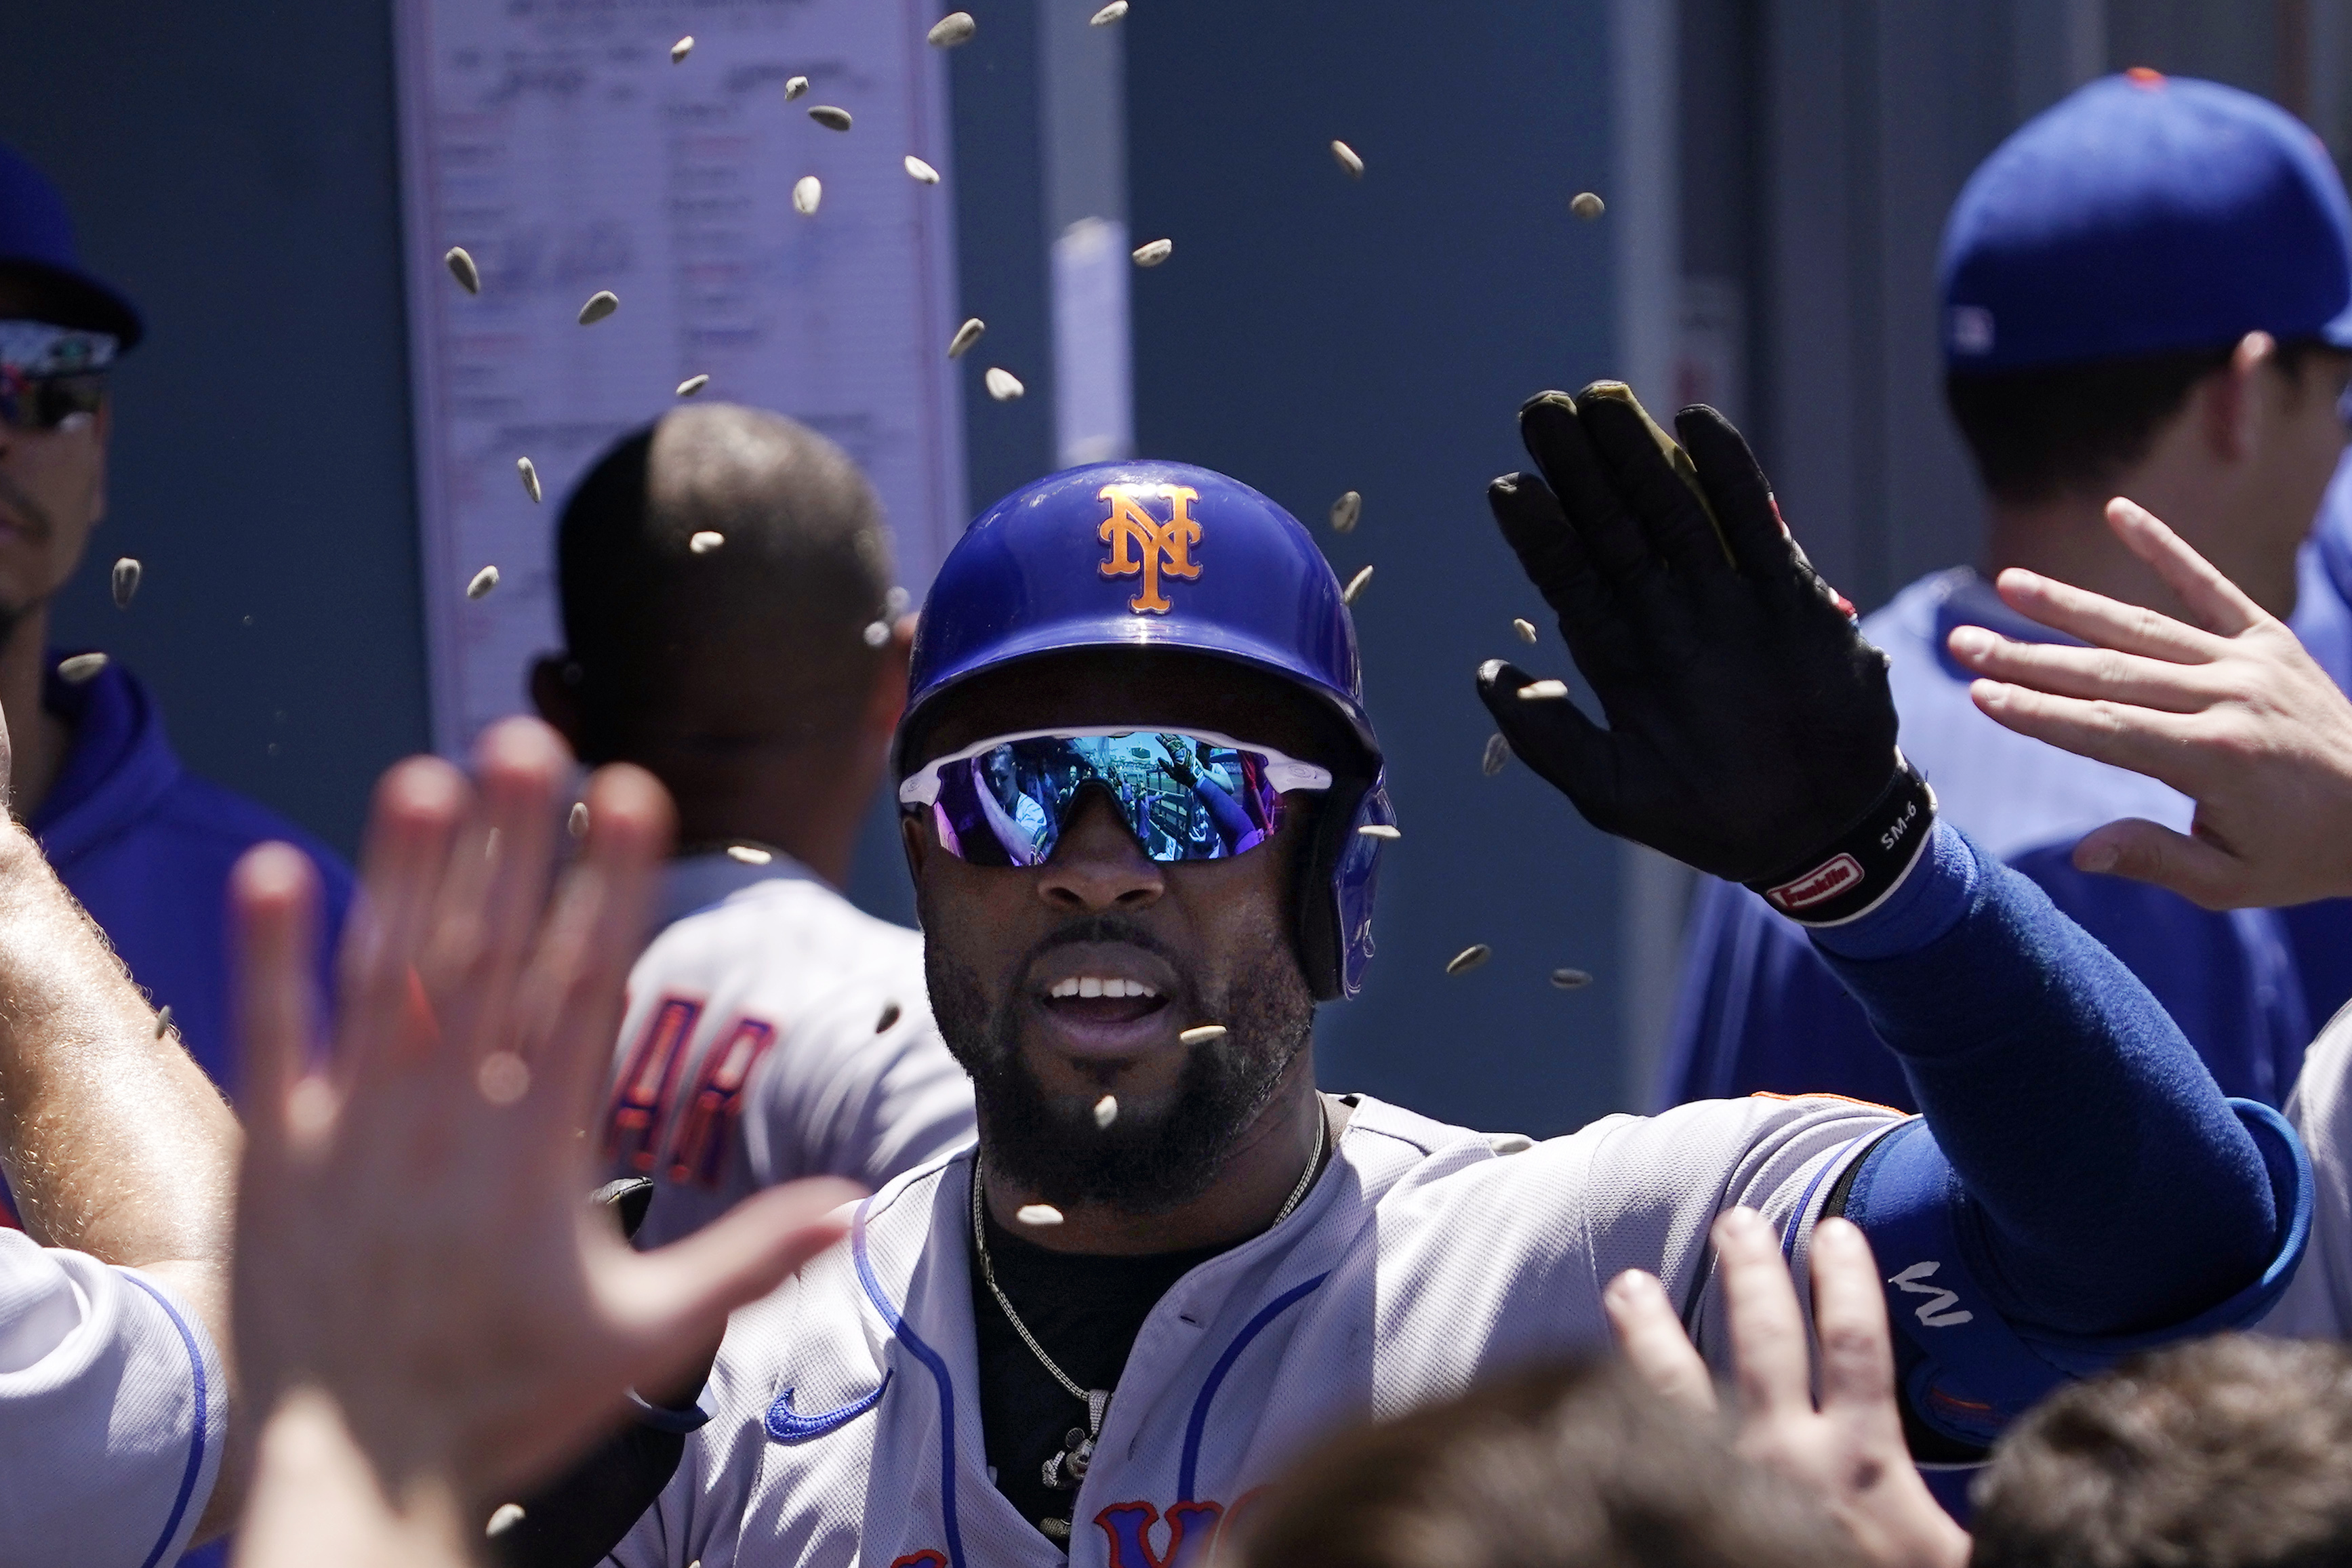 Mets blow late lead but rally in 10th to beat Dodgers 5-4